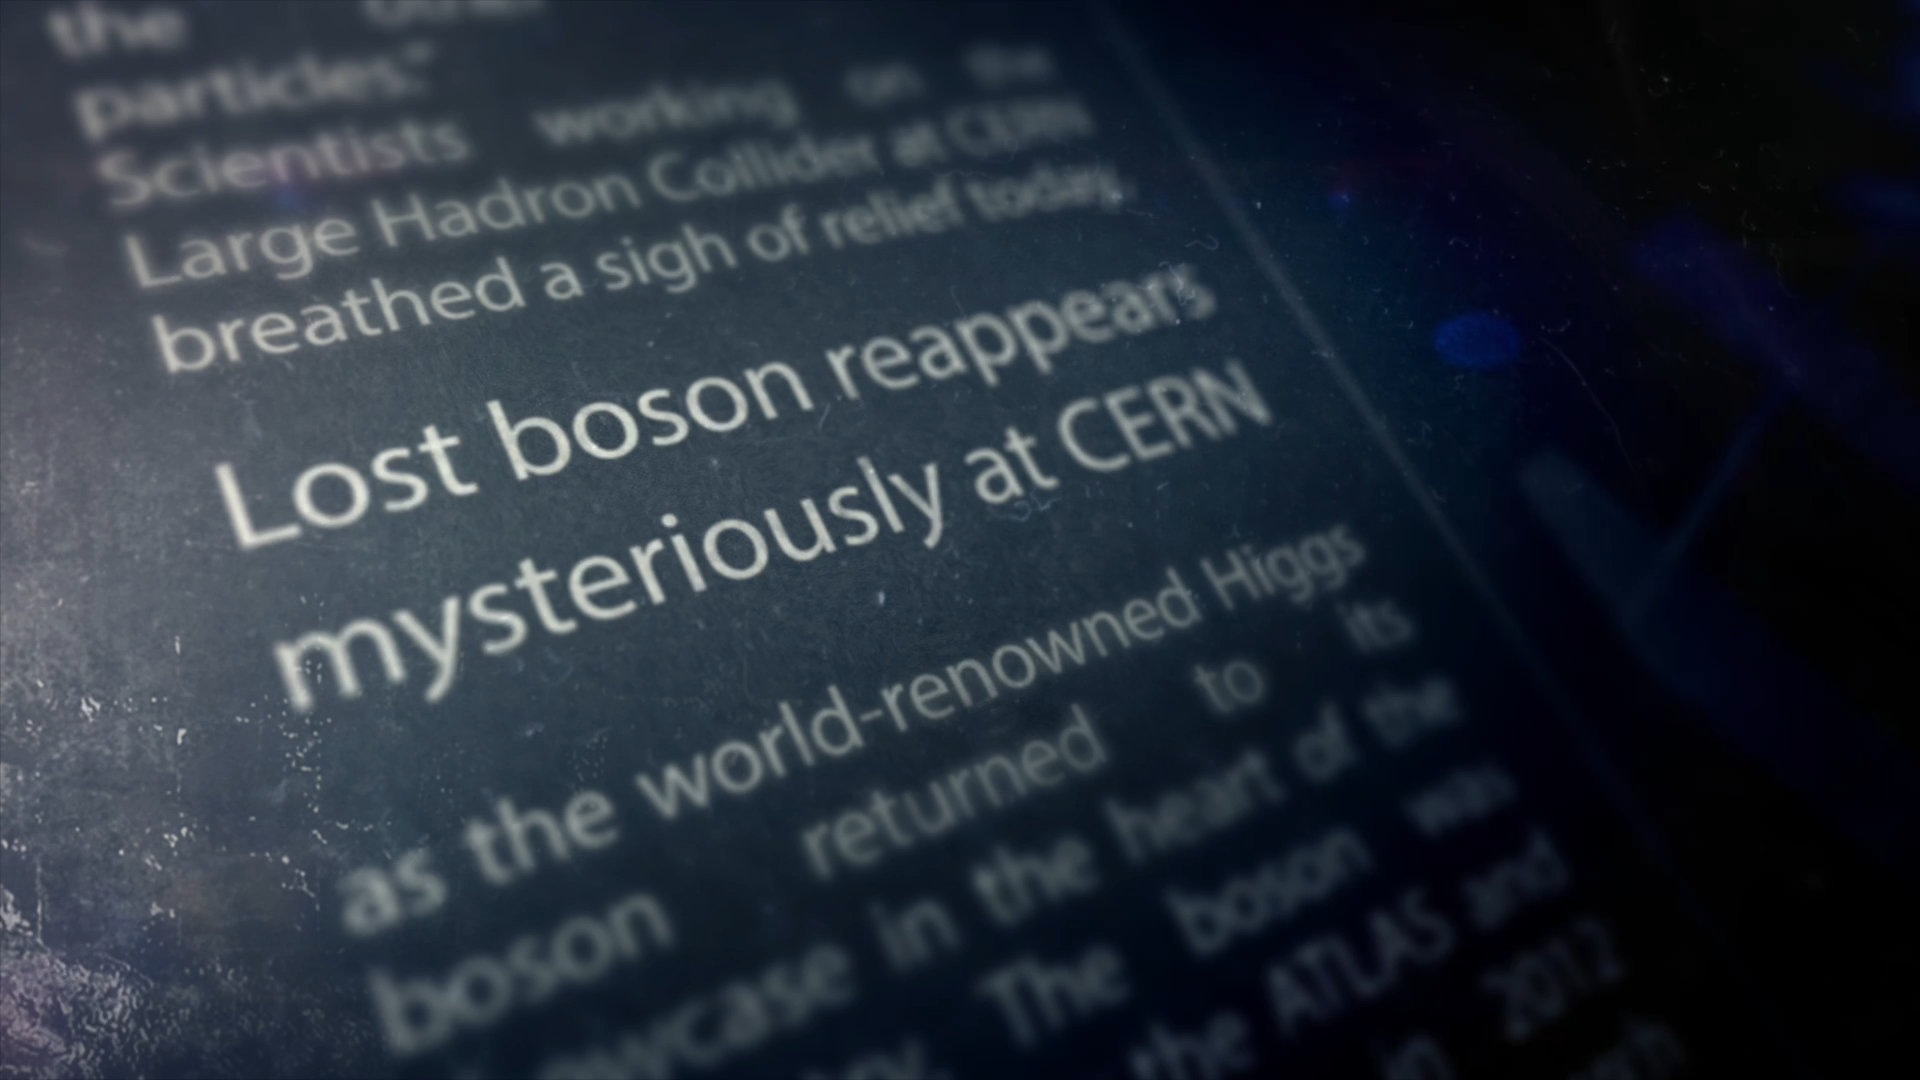 Lost boson reappears mysteriously at CERN